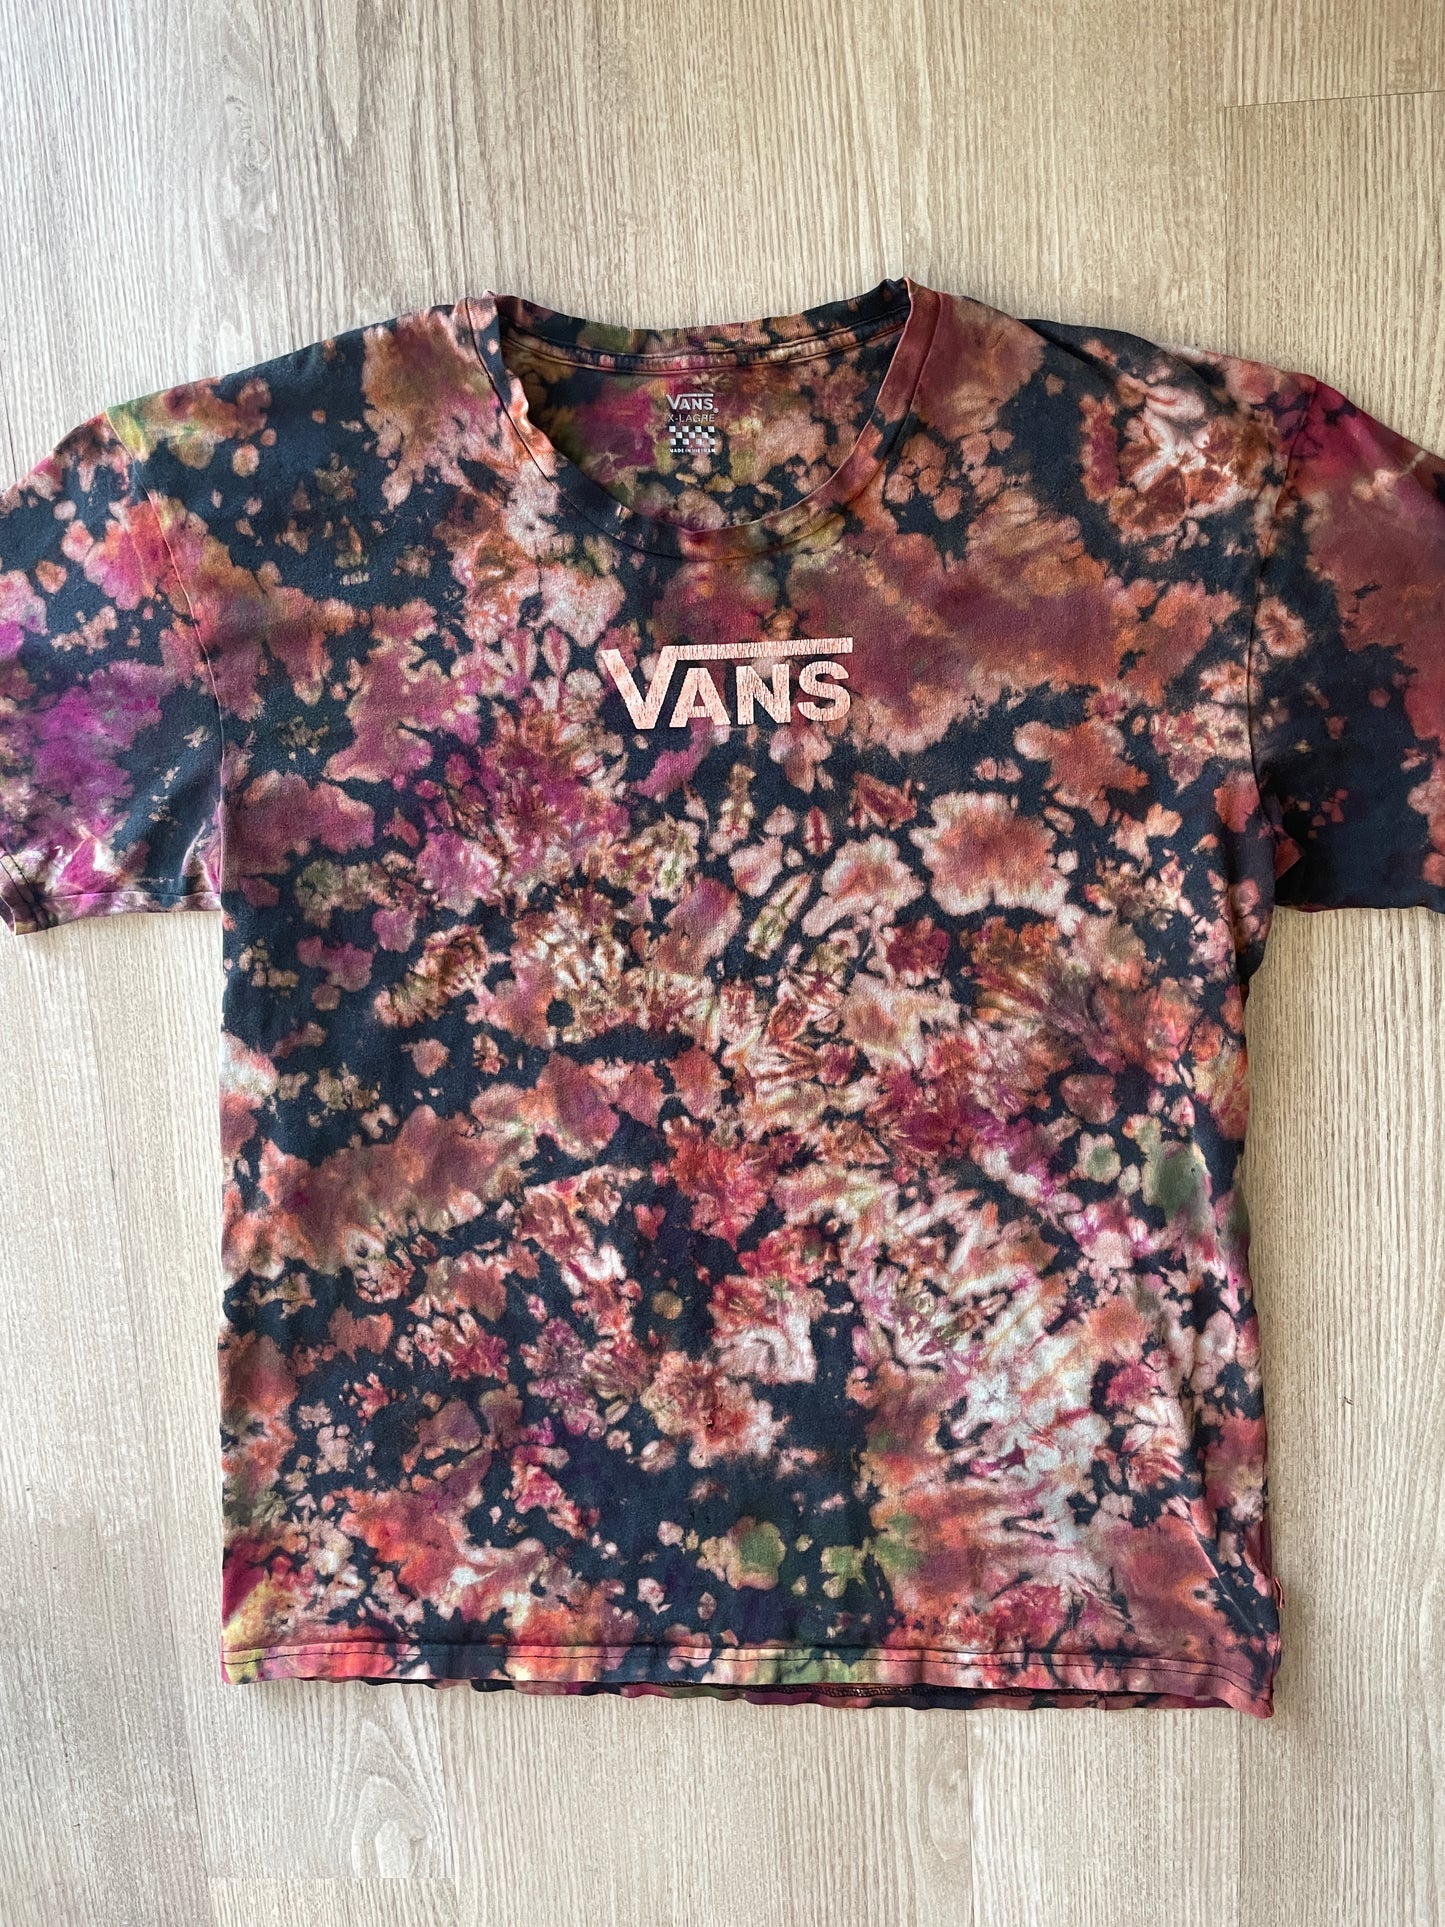 XL Men’s Vans Floral Handmade Reverse Tie Dye T-Shirt | One-Of-a-Kind Black and Red Short Sleeve